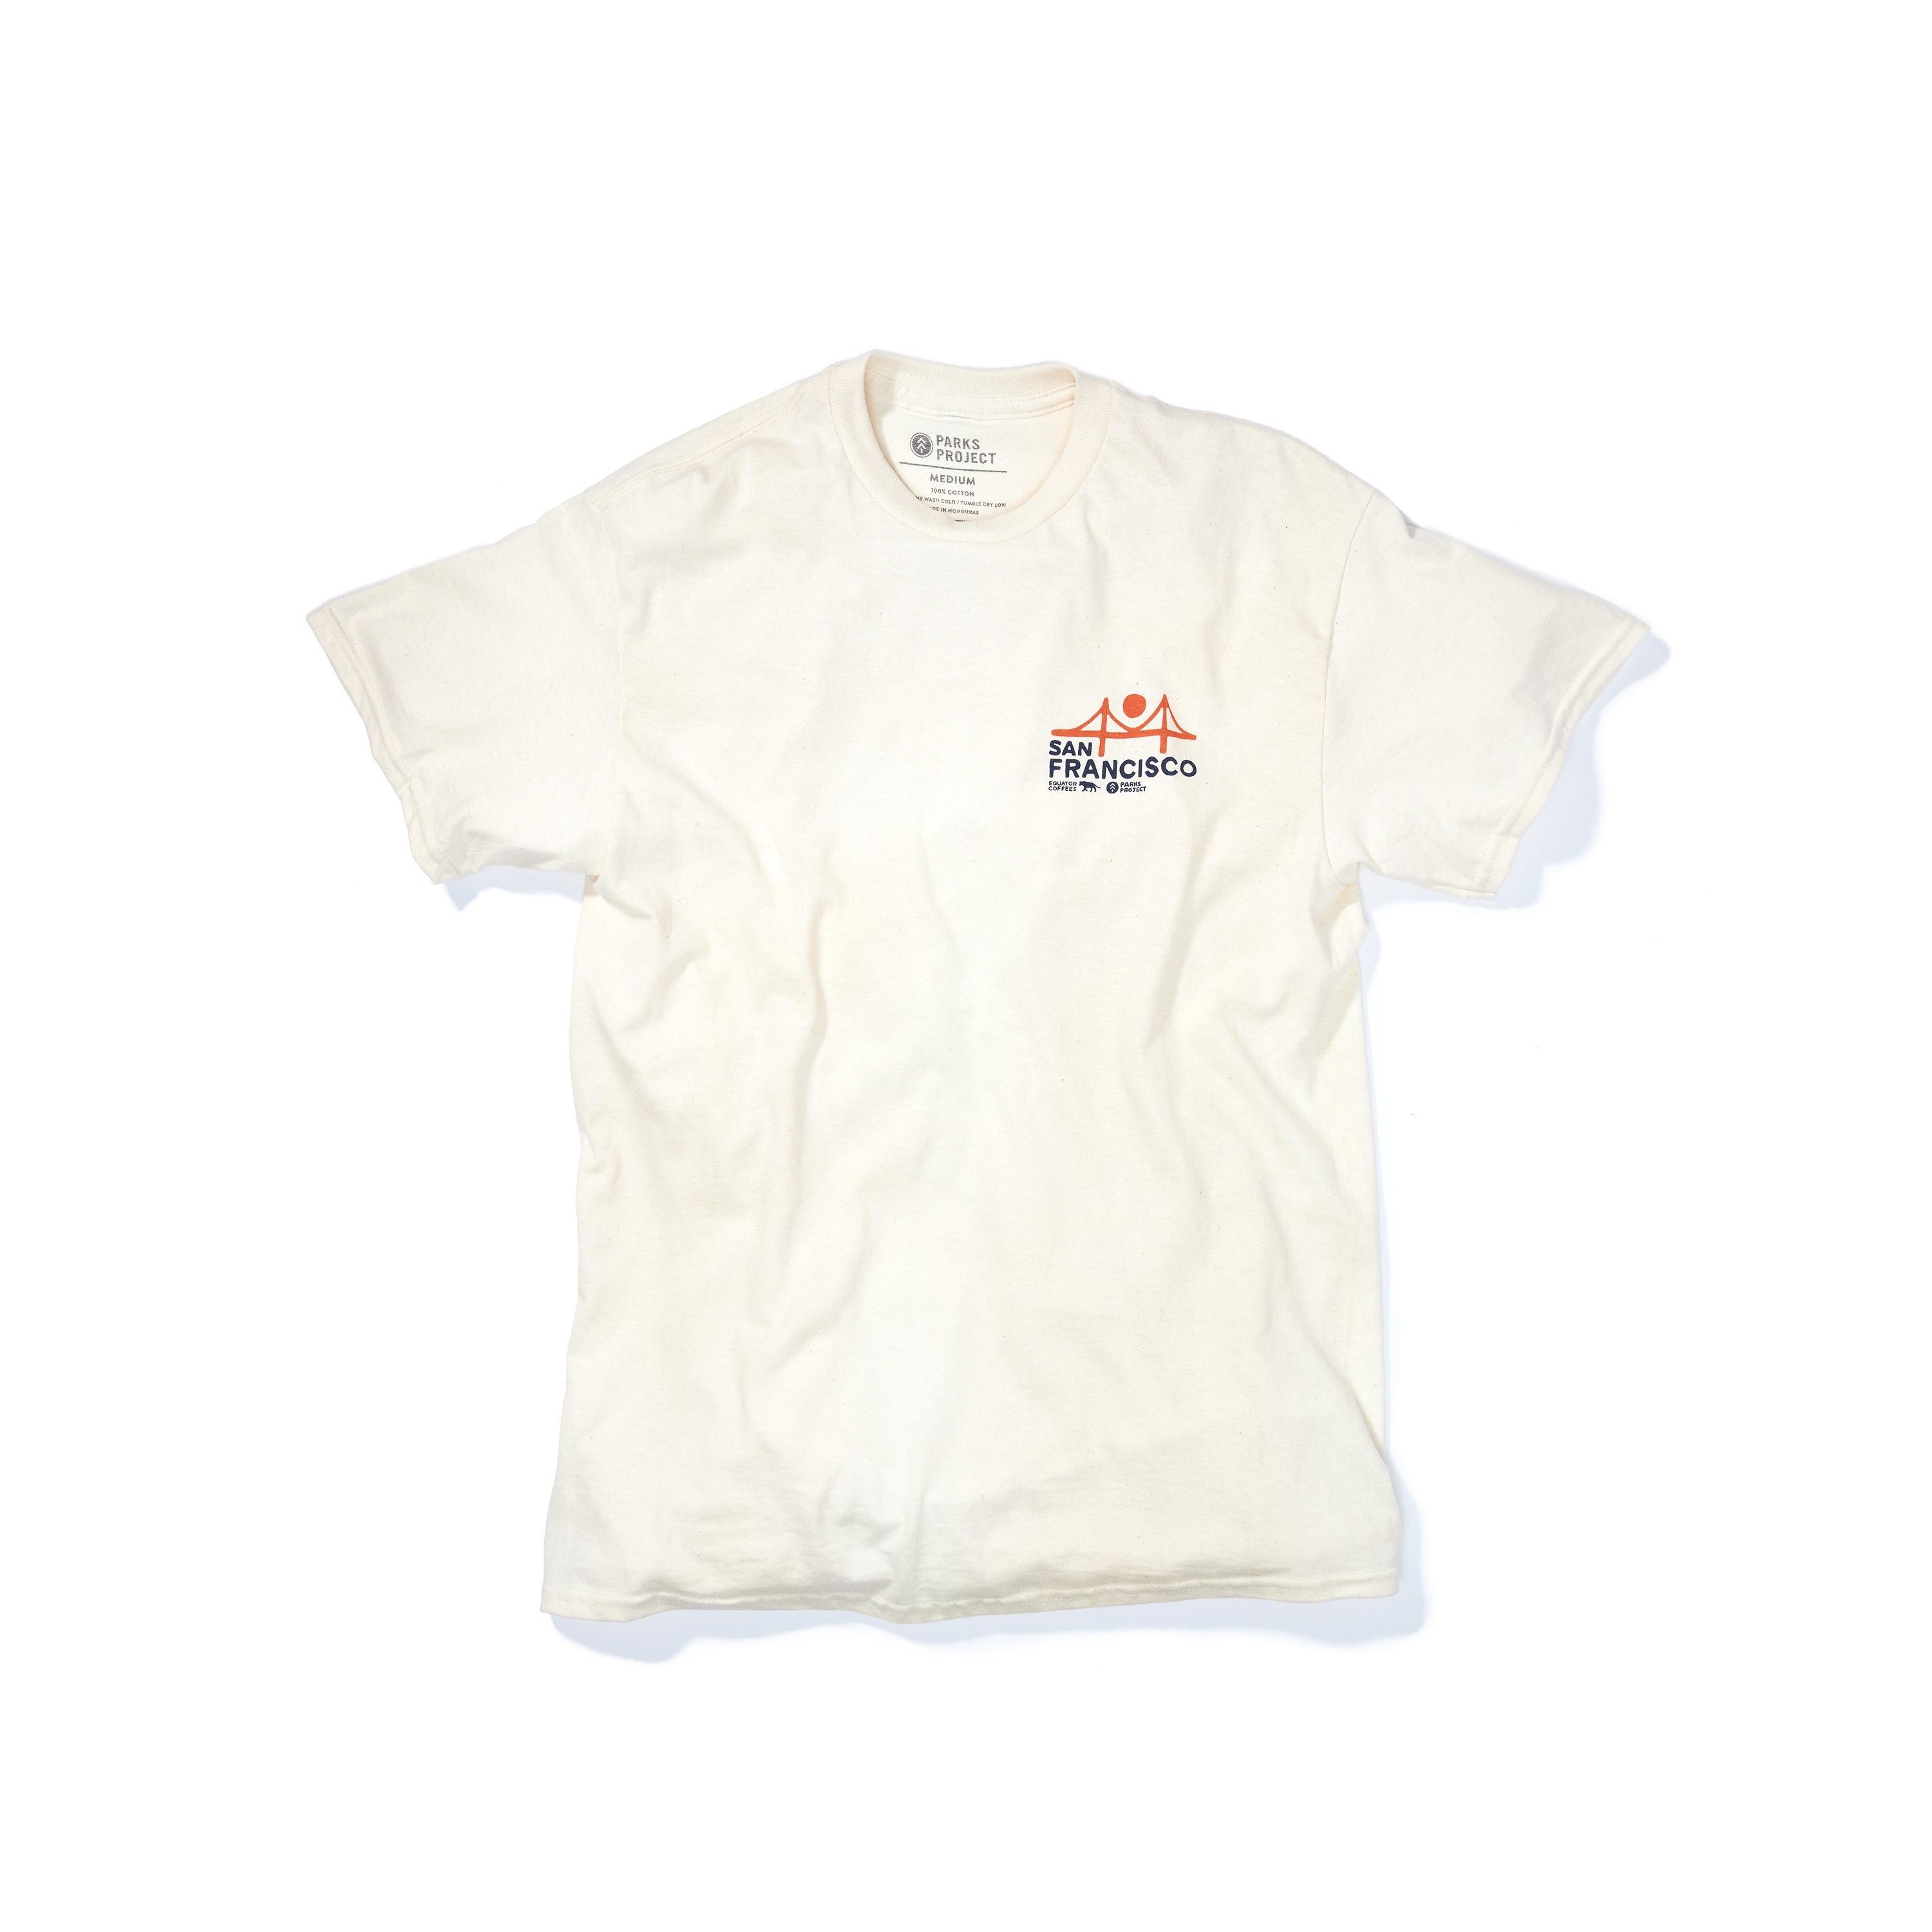 Parks Project Tee - Tan